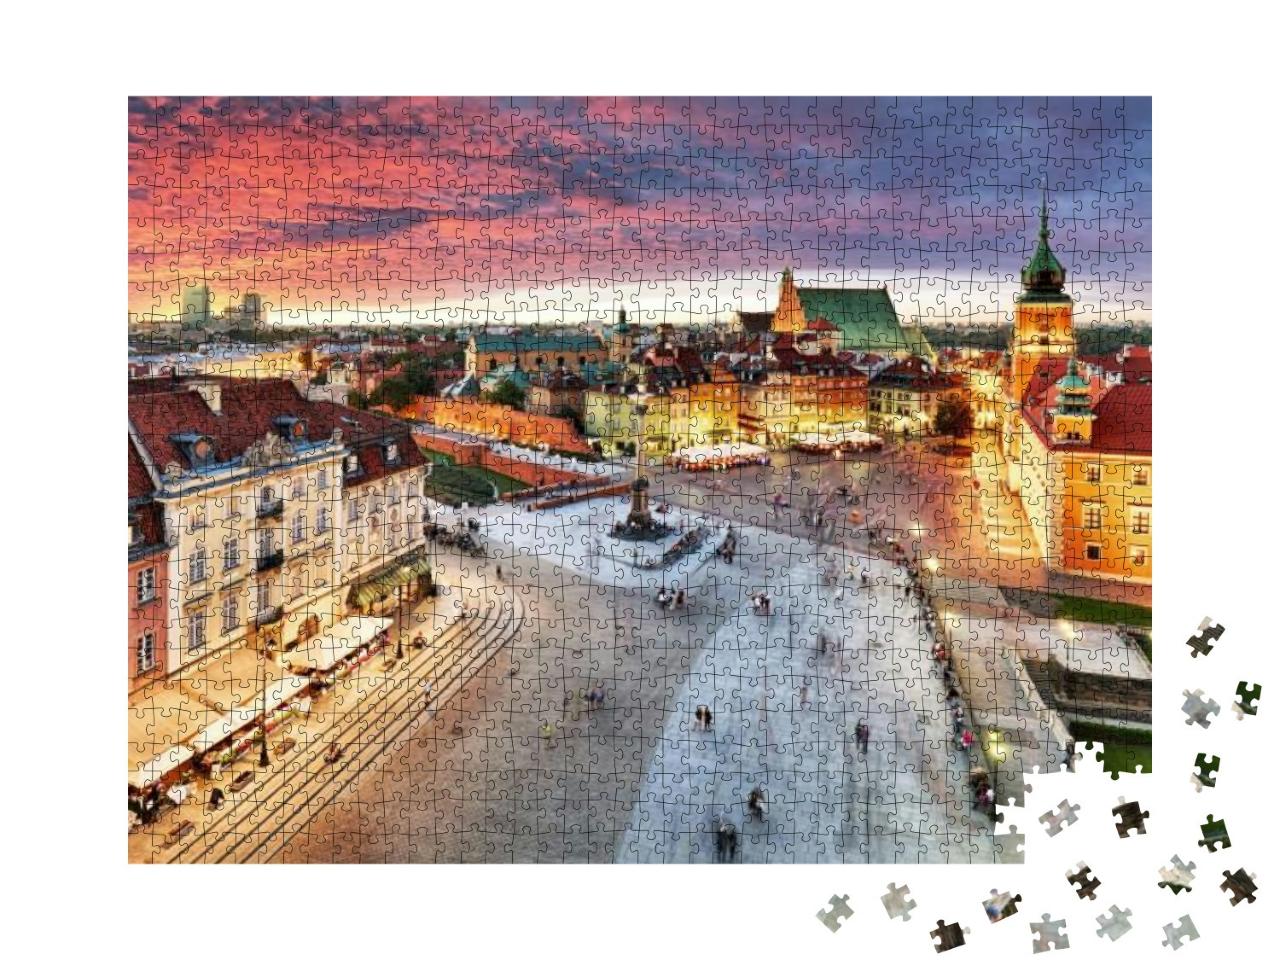 Warsaw, Royal Castle & Old Town At Sunset, Poland... Jigsaw Puzzle with 1000 pieces